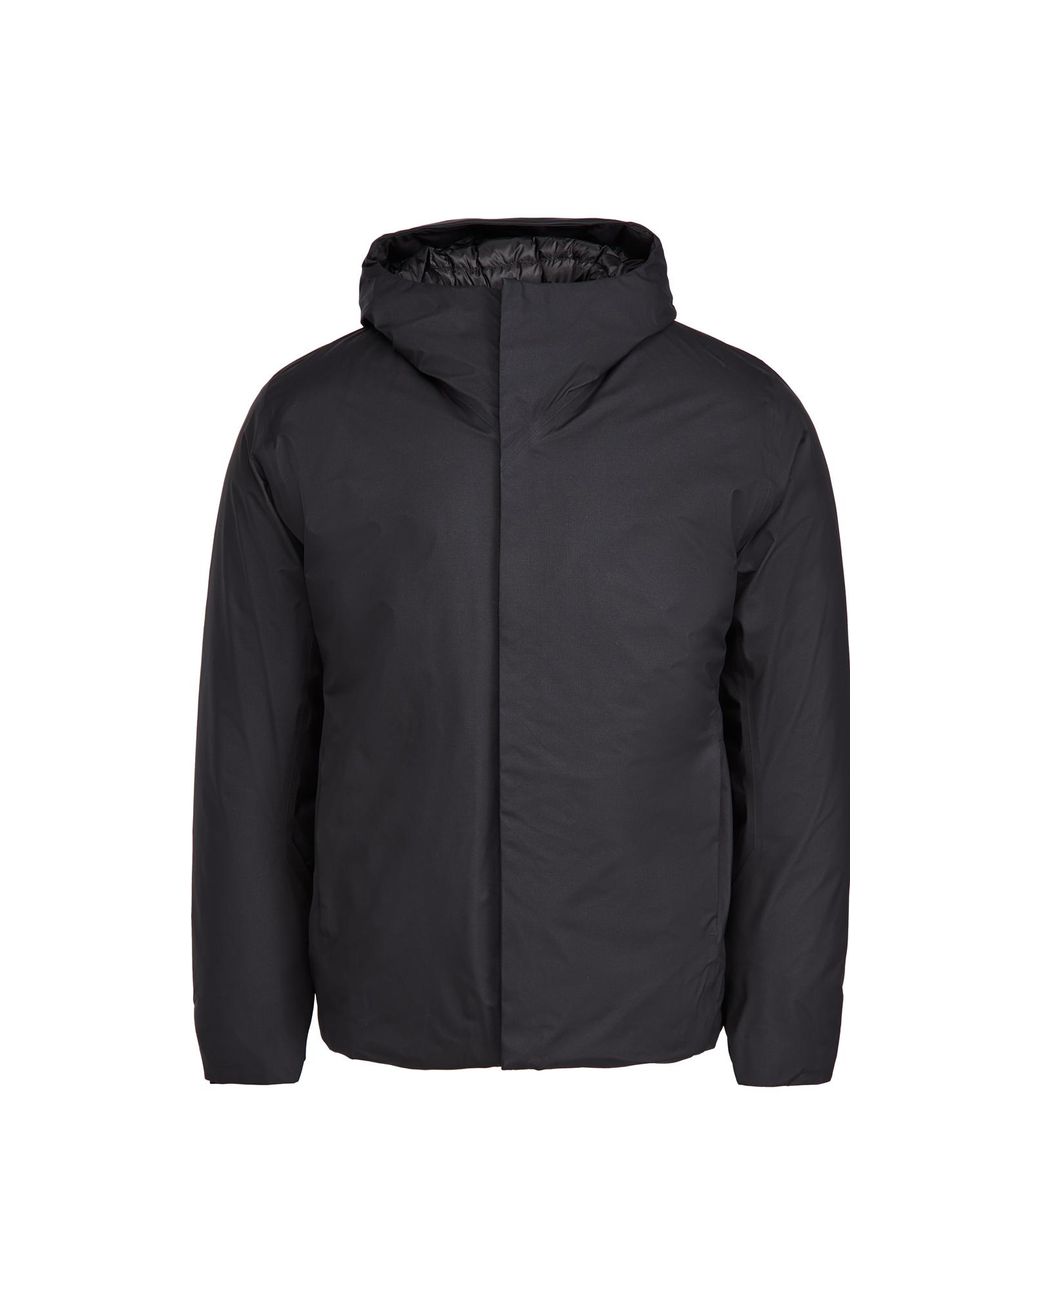 Arc'teryx Synthetic Altus Hooded Down Jacket in Black for Men - Lyst